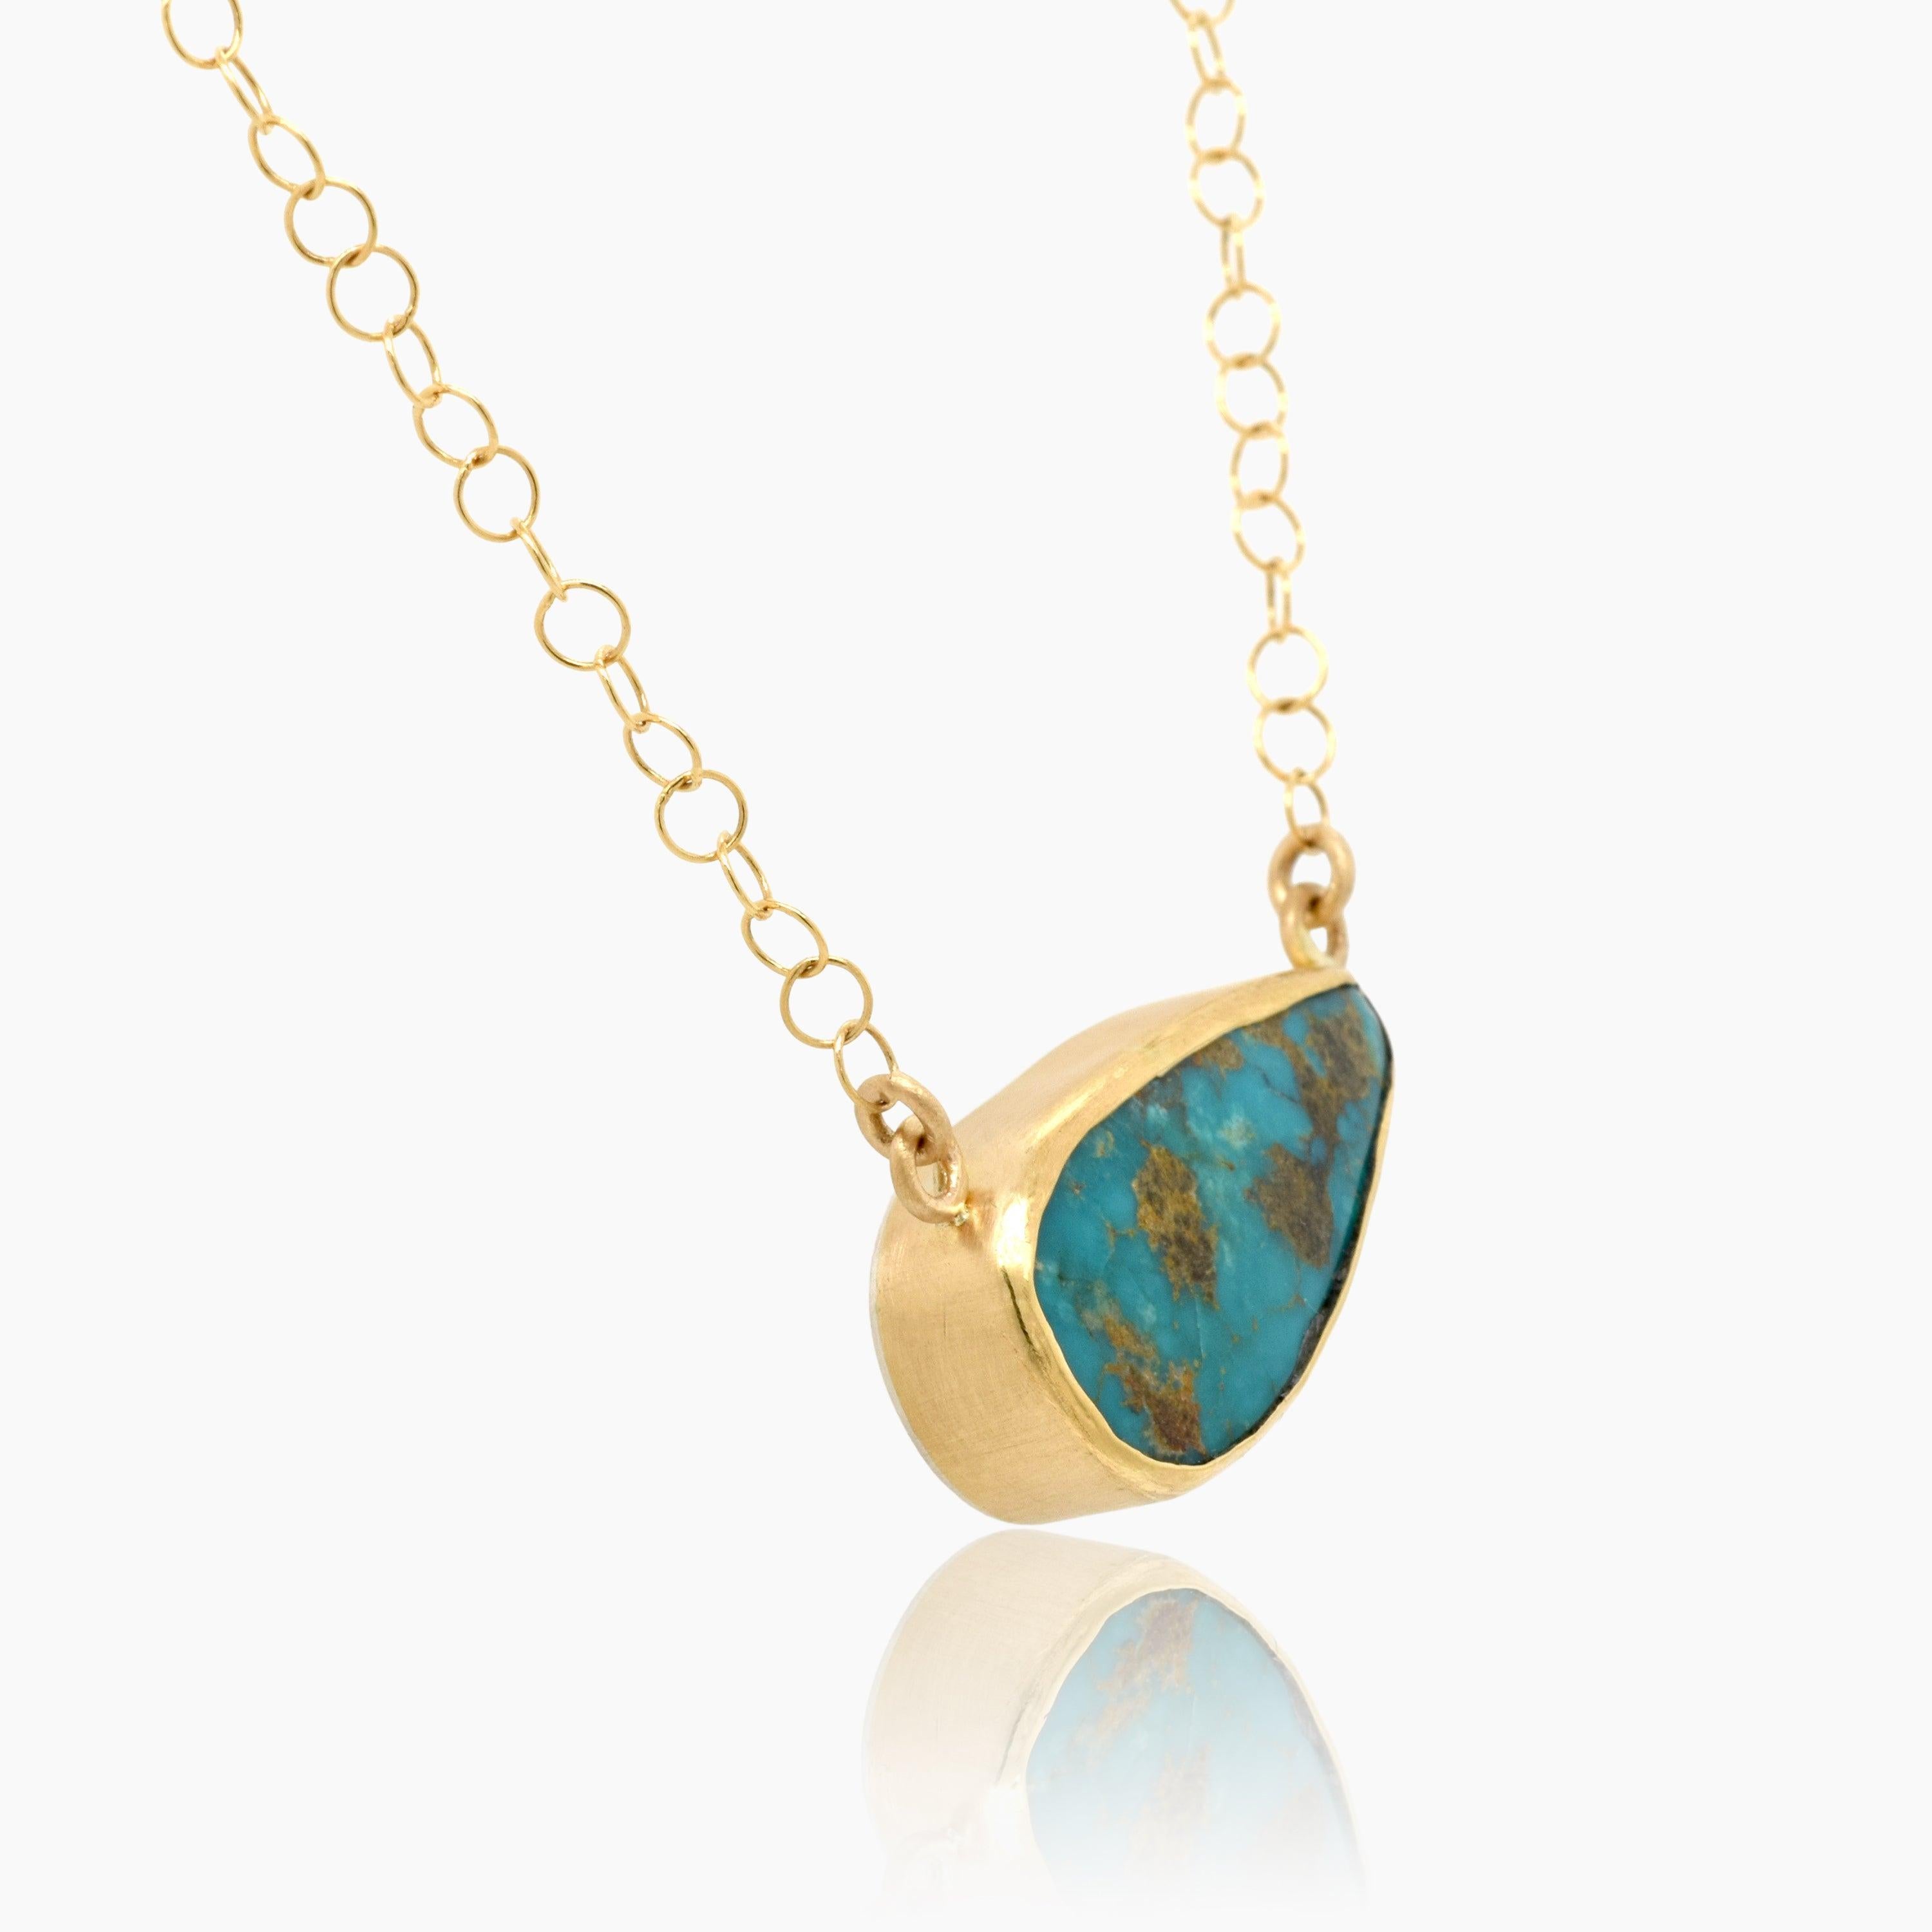 Ocean blues and greens make this 13 carat teardrop shaped Persian Turquoise special.  Encased in 18K gold with an 18K gold link chain, it is backed with a textured sterling silver as well as a a textured brushed finish on the sides.    The necklace